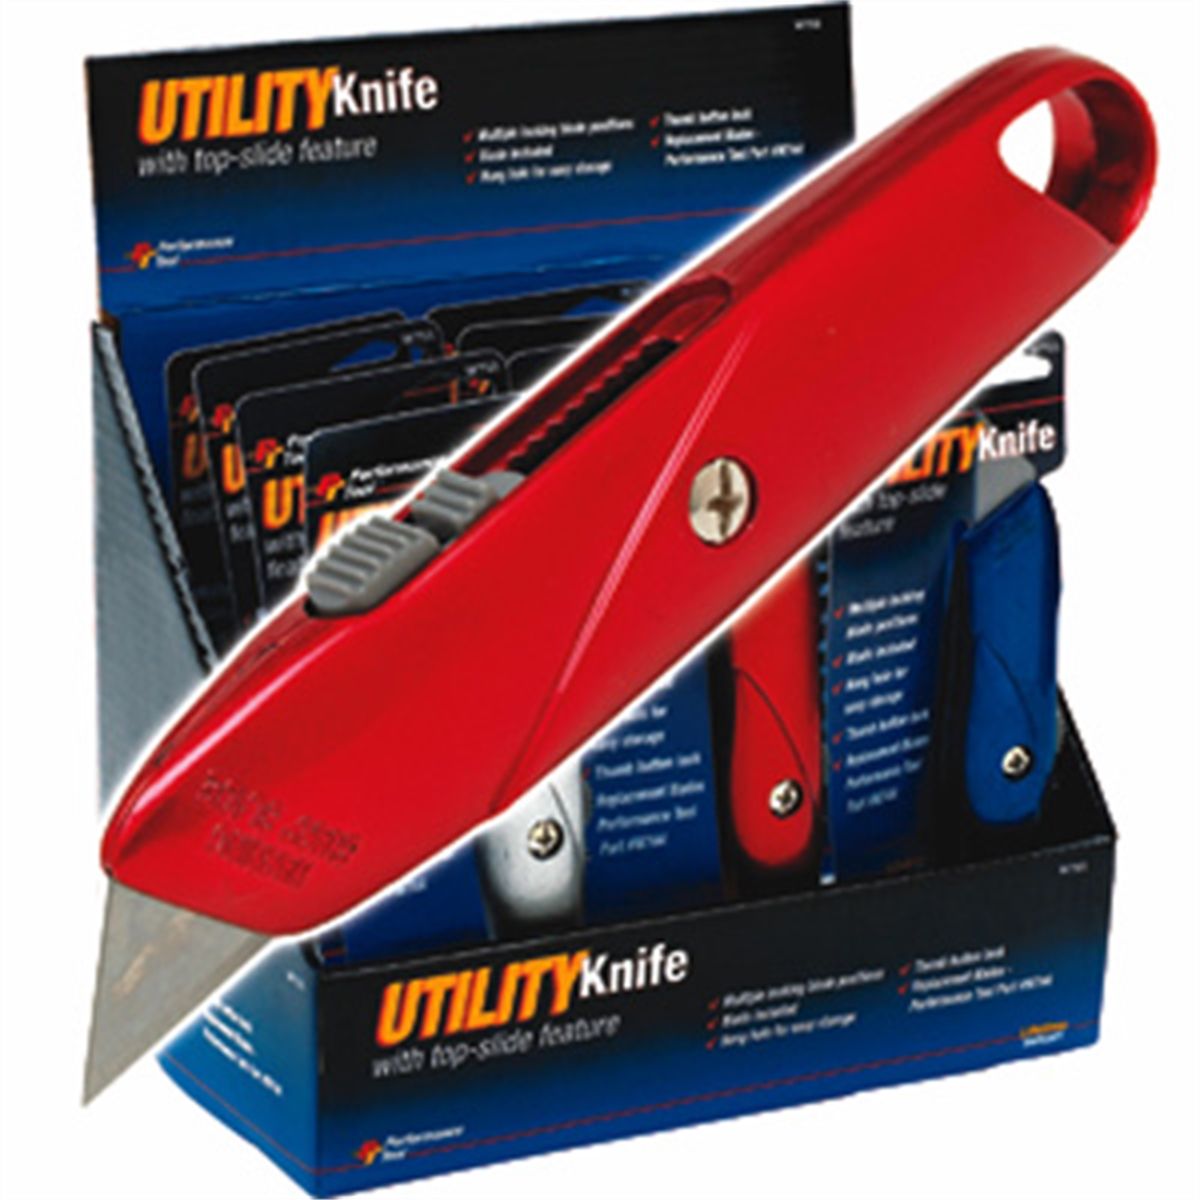 Colored Utility Knife Display